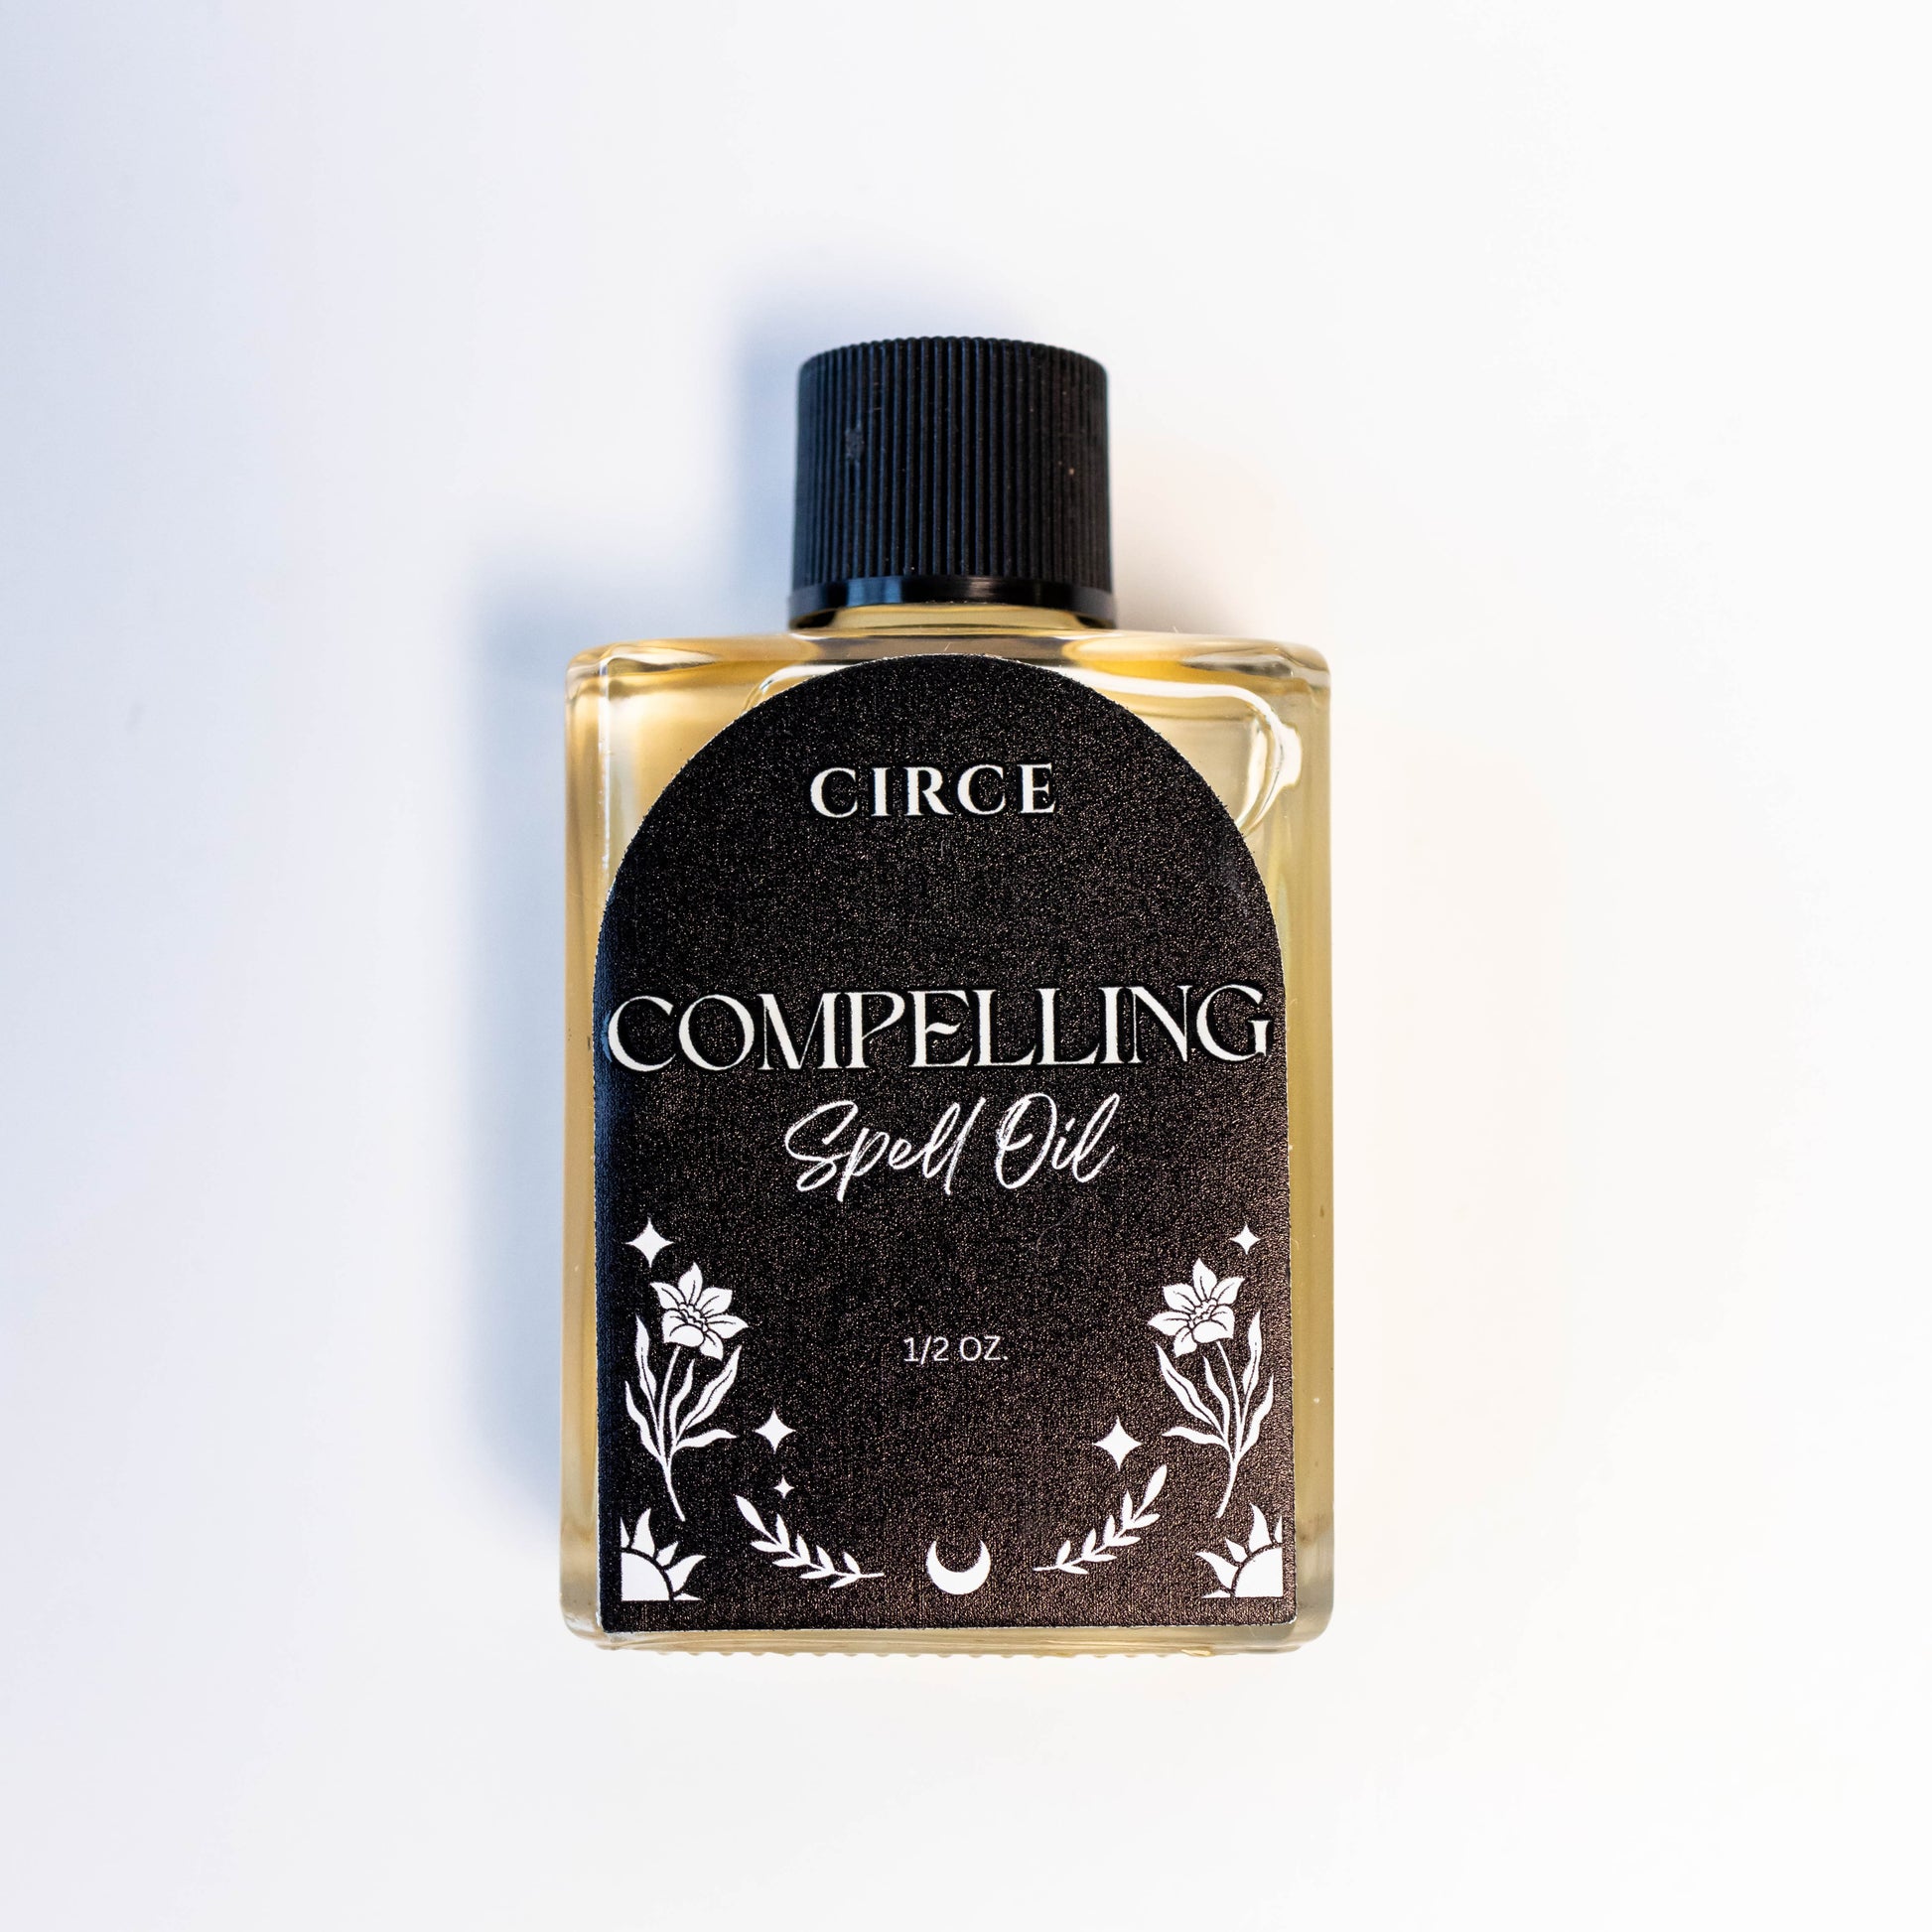 CIRCE Compelling Spell Oil 1/2 oz. - Oil Spell Oil from CirceBoutique